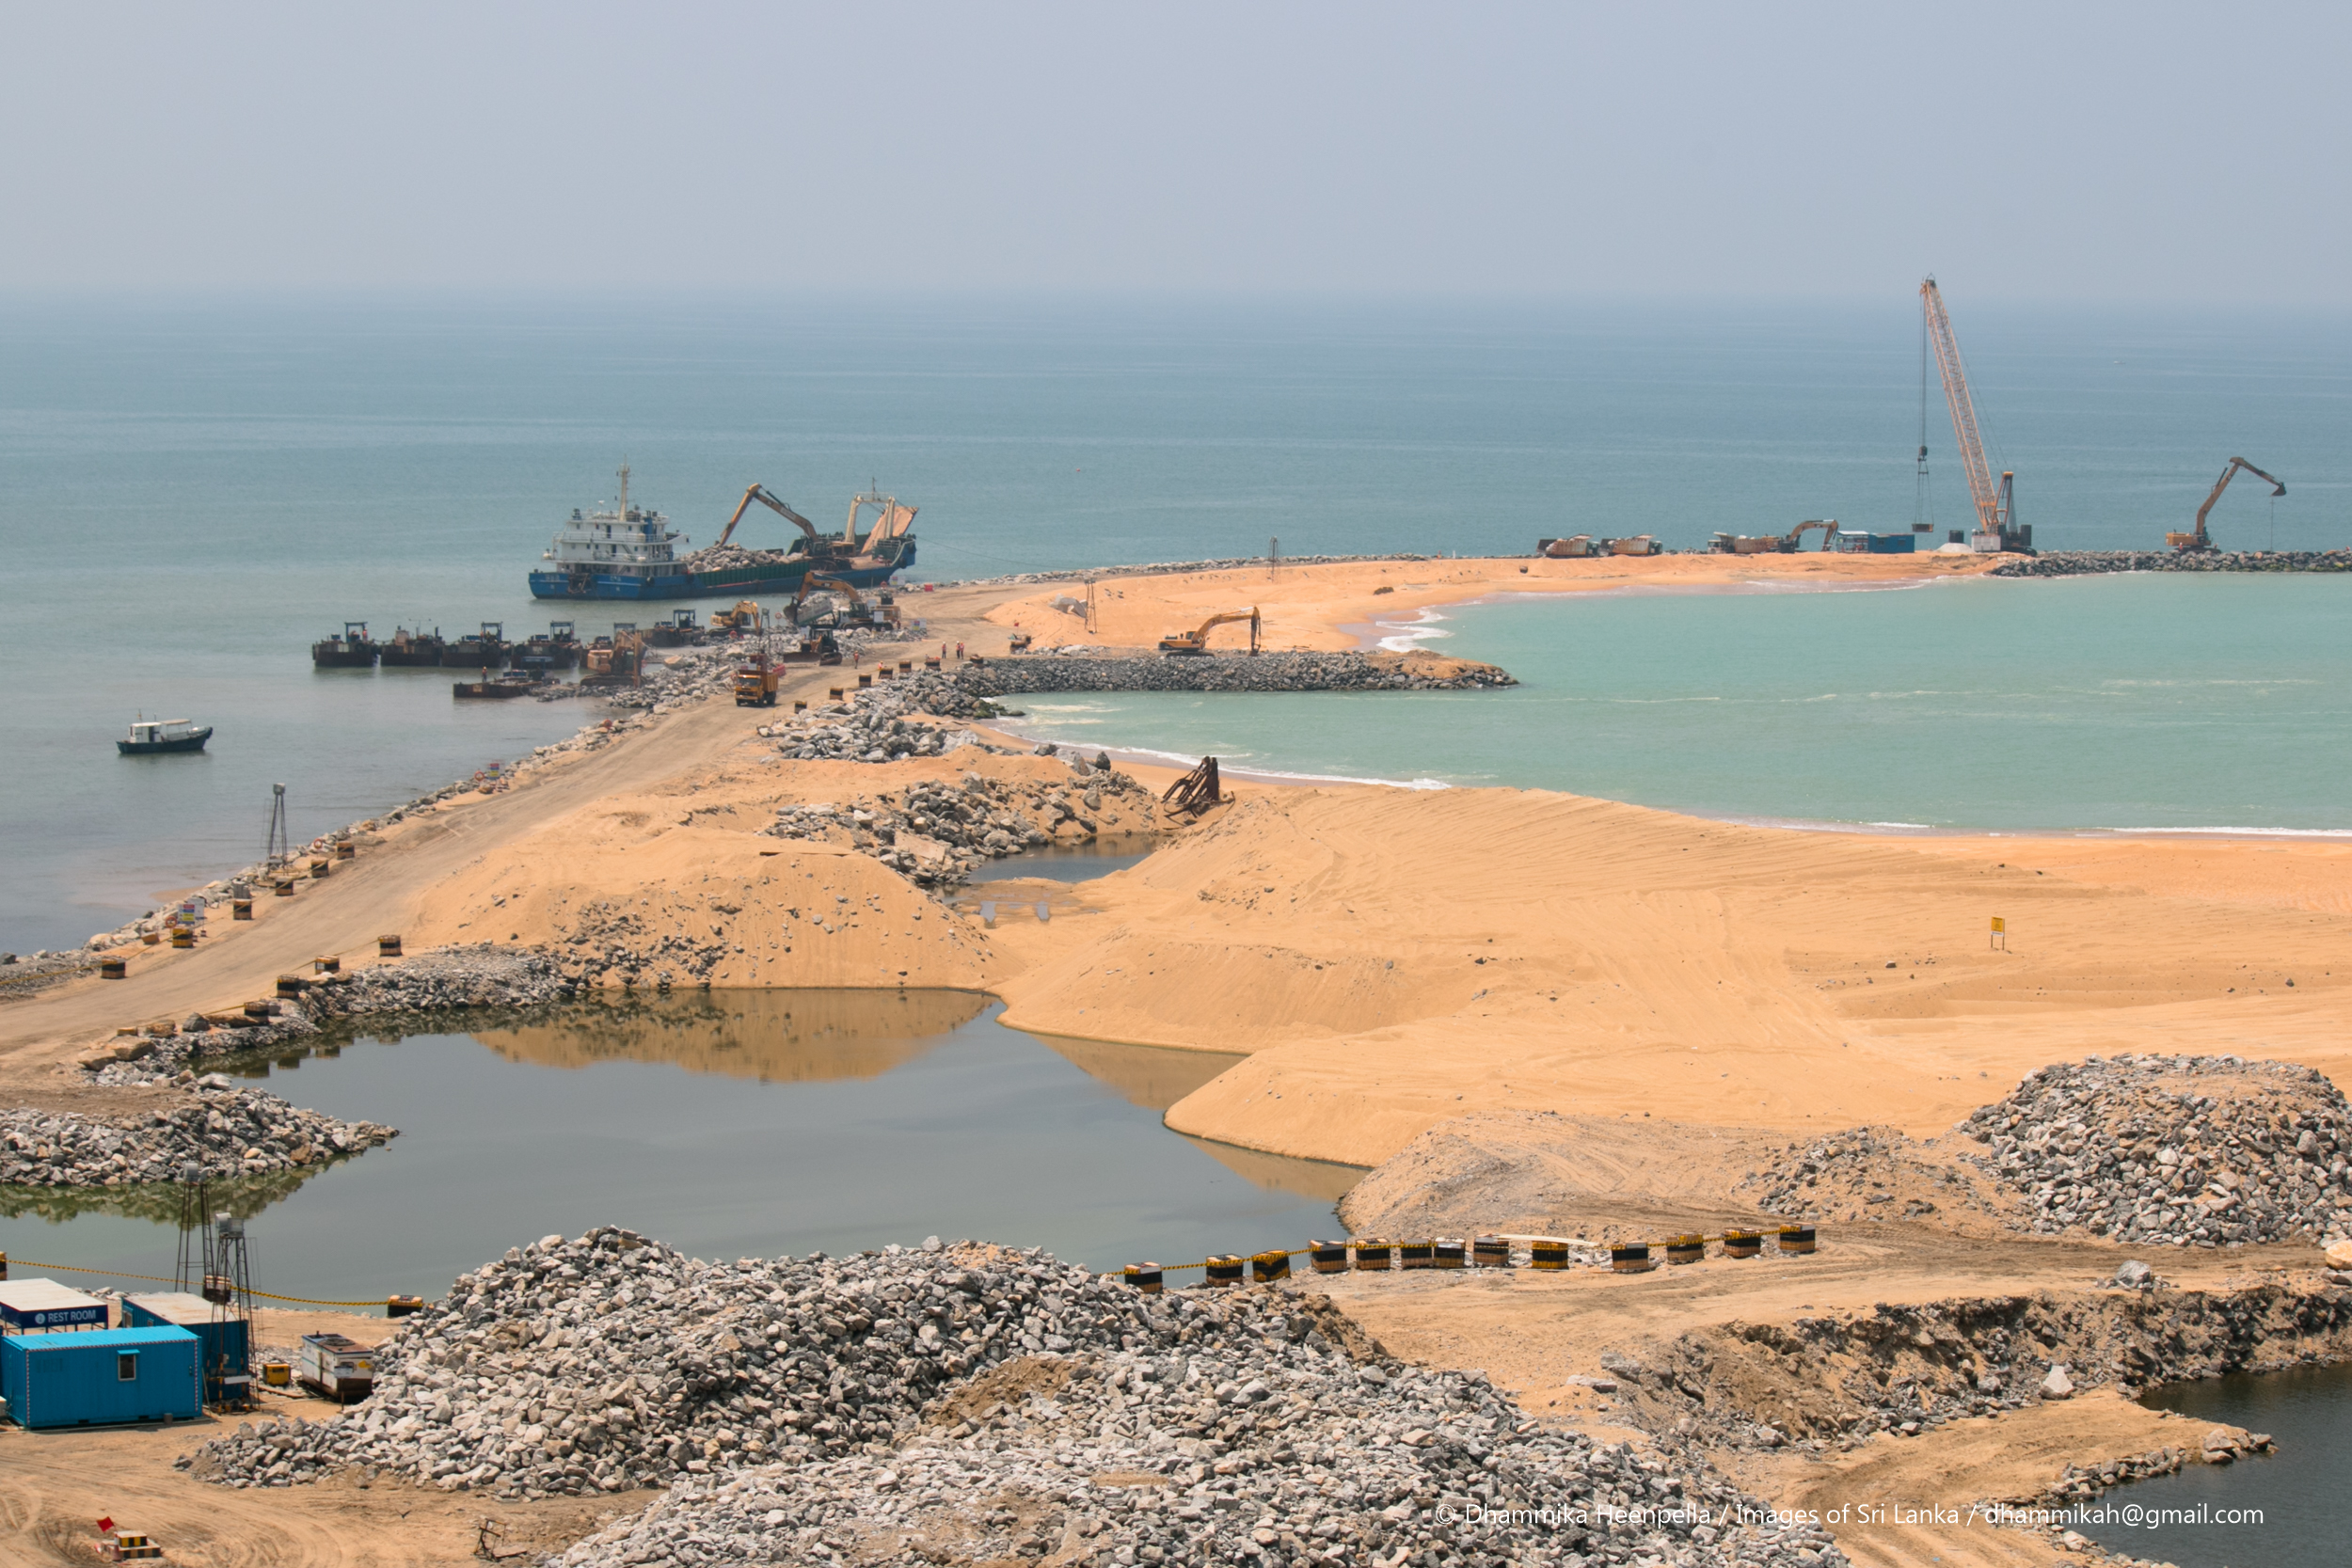 <p>Port City construction site. The project is a key part of China’s Belt and Road initiative, but there are growing concerns about its environmental impacts (Image: Dhammika Heenpella)t </p>